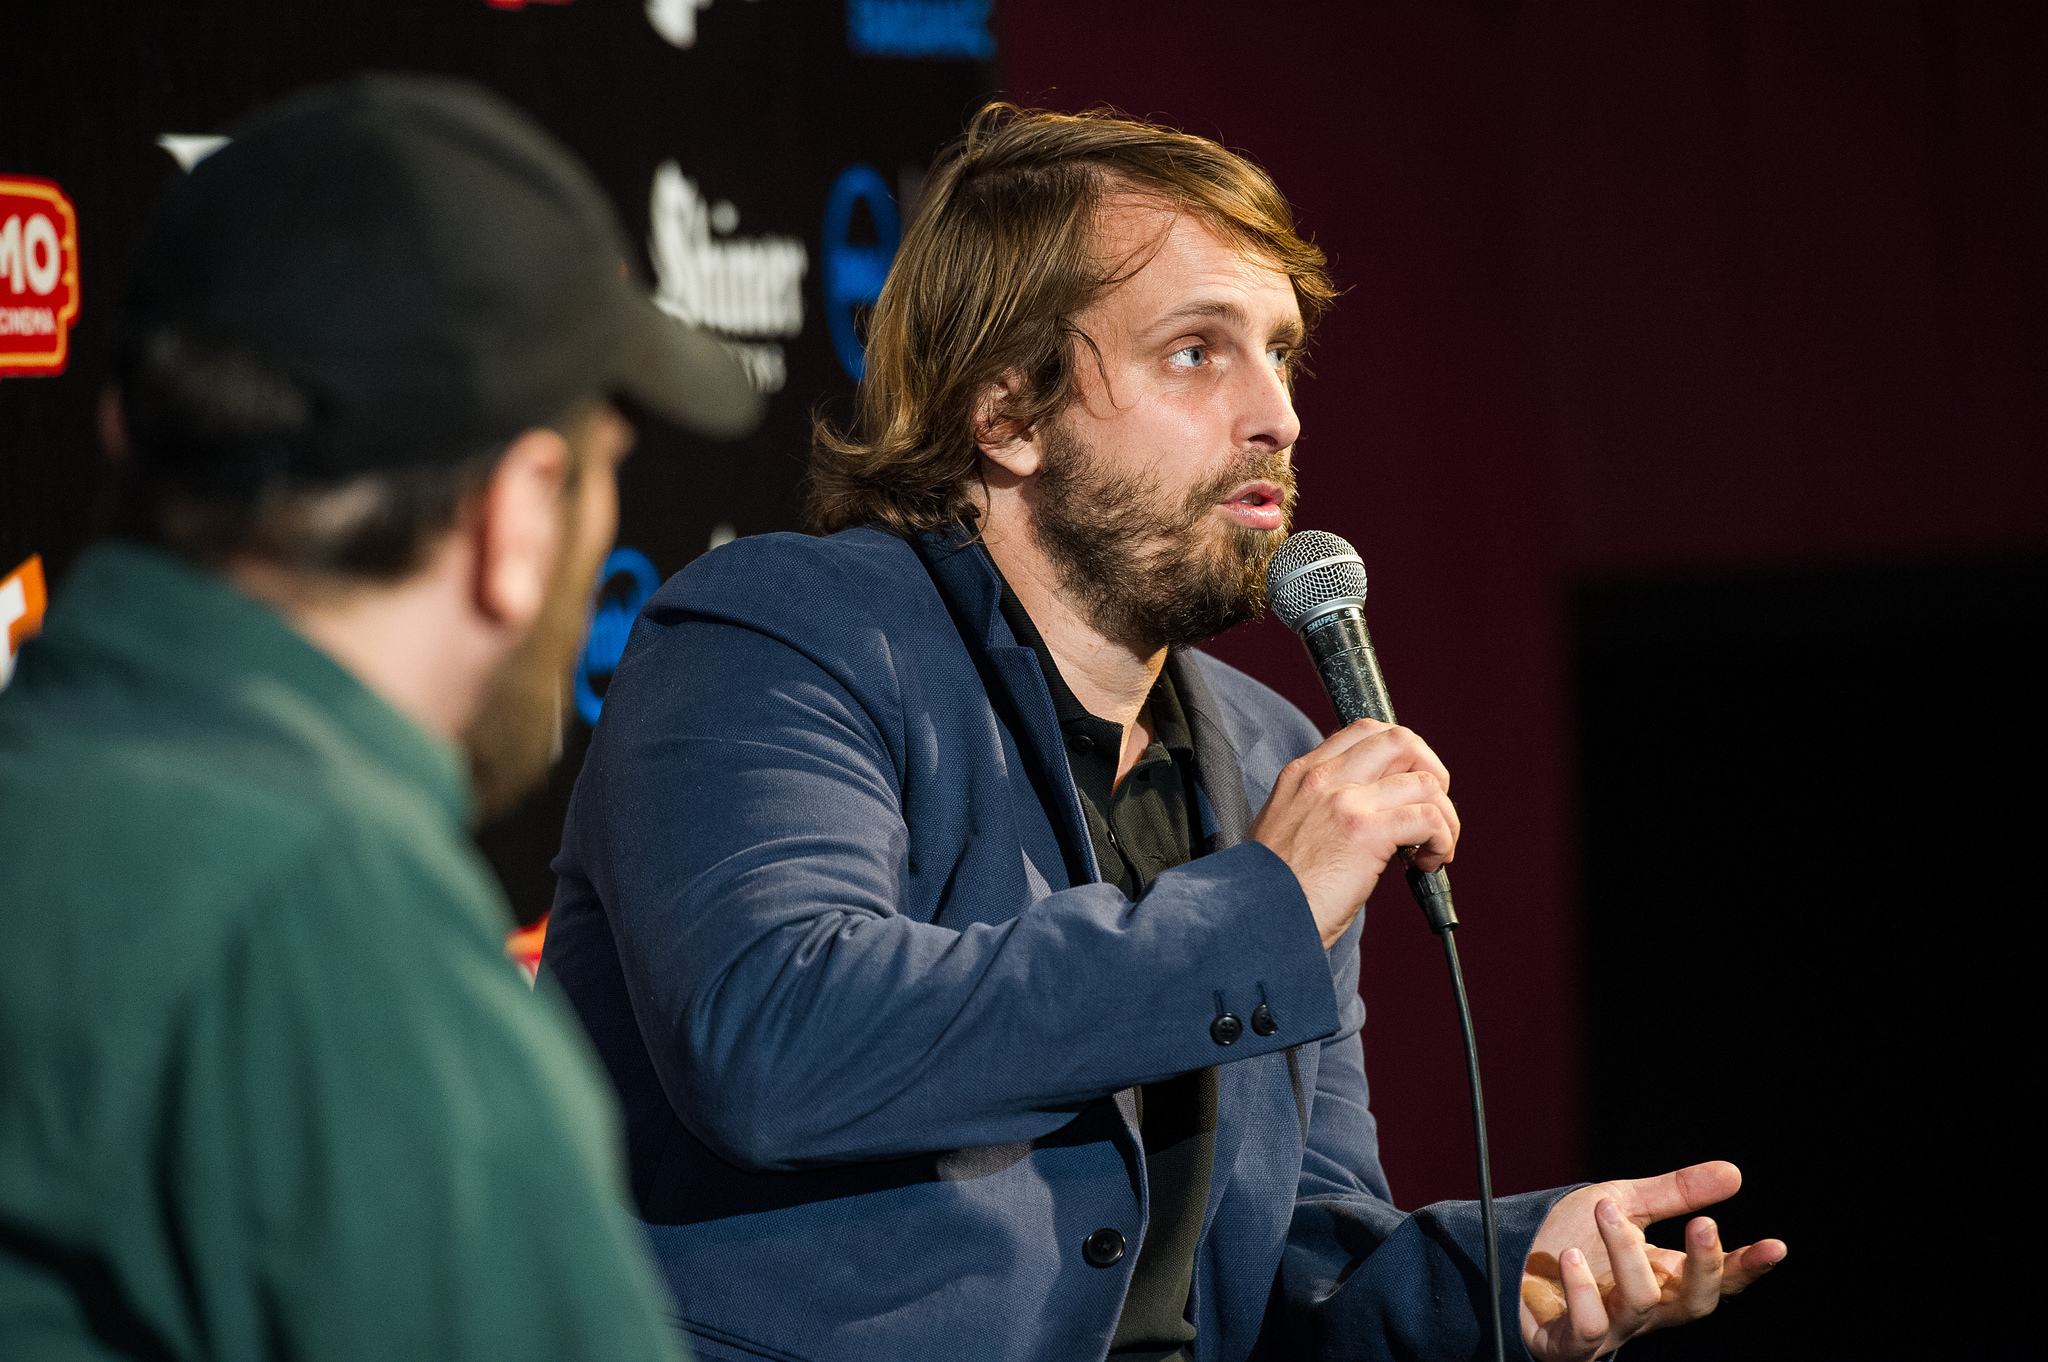 Alexandre Aja at event of Horns (2013)